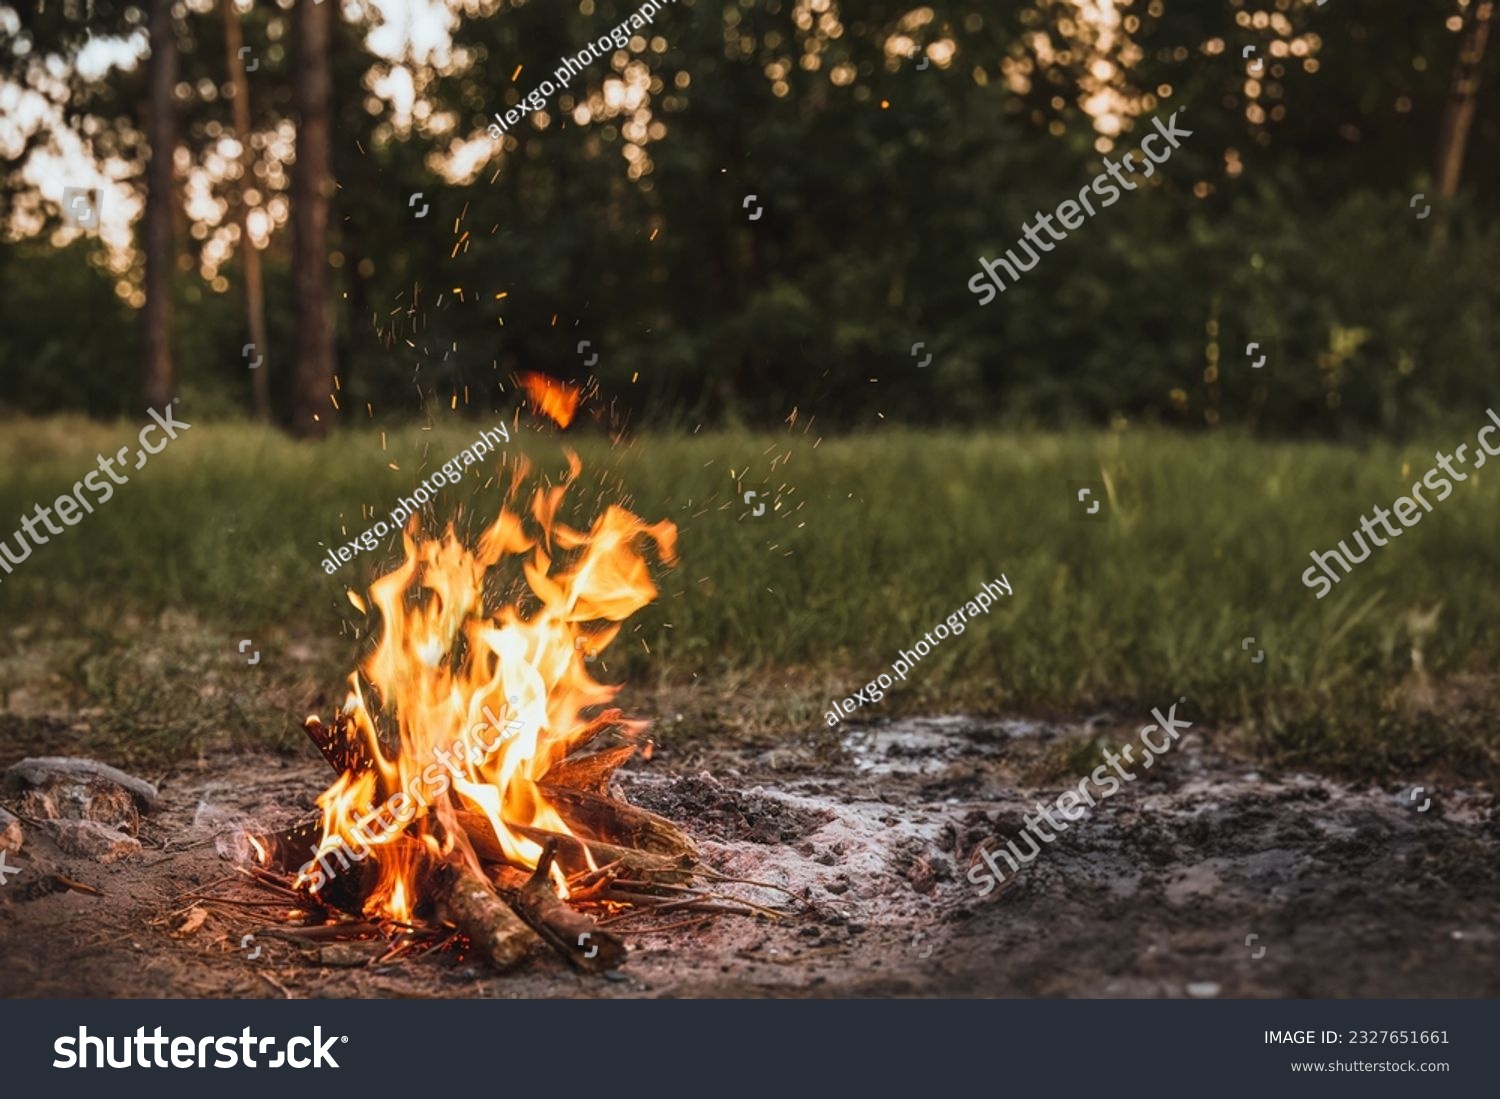 A Lonely Evening by the Forest Campfire - Embracing the Beauty of Nature with the Fire Burning at Dusk near a River, Against the Enchanting Evening Sky #2327651661